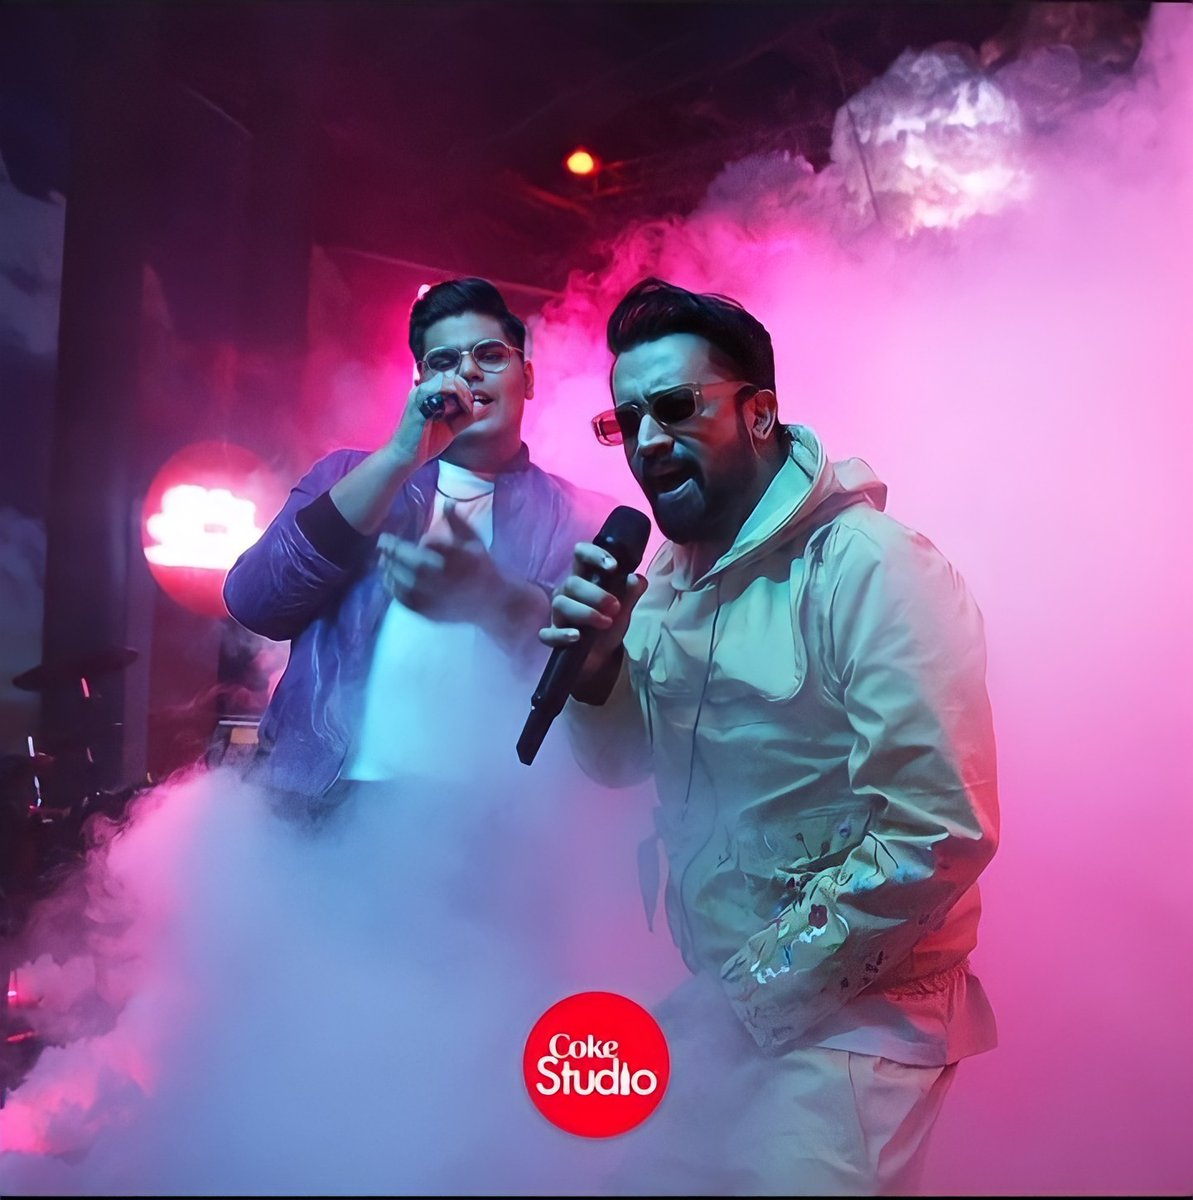 That was dope 🔥❤
Atif Aslam showing his versatility in this season and that's why he is GOAT.
And Abdullah Siddiqui , what a talented guy he is at this very young age.
Overall love the vibe of this song ❤.
#AtifAslam #SoundOfTheNation #CokeStudioSeason14